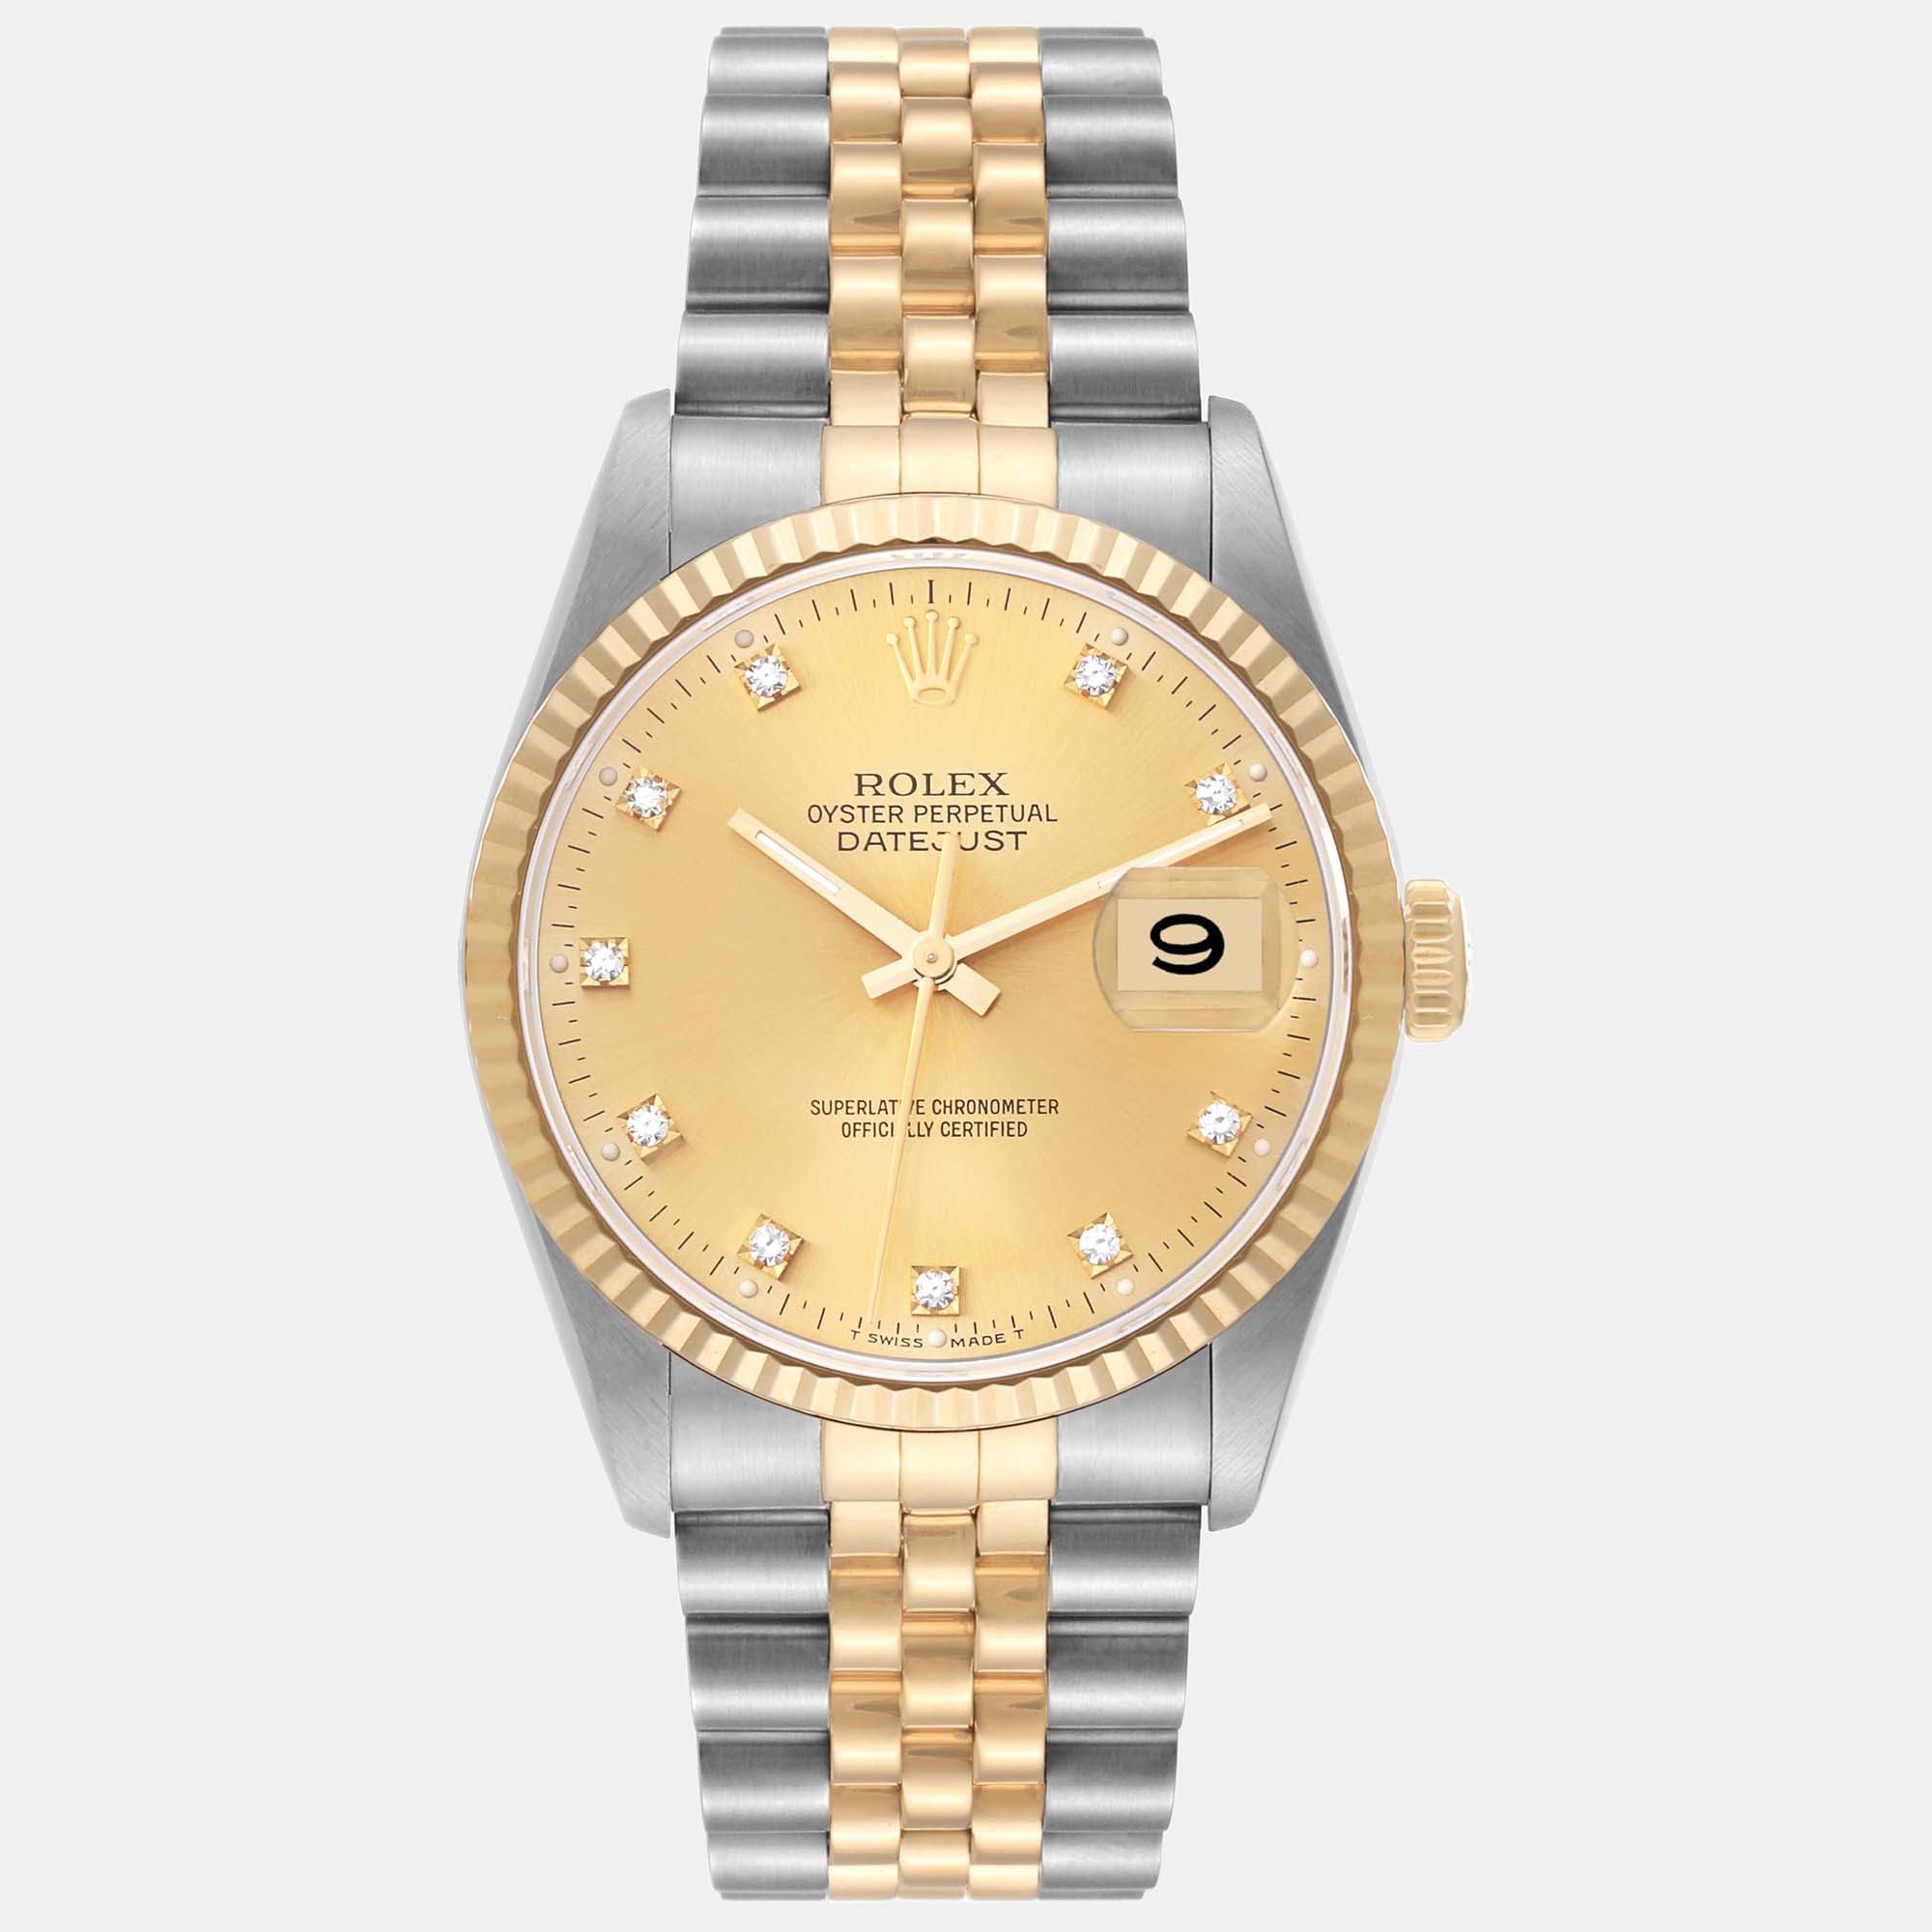 Experience the epitome of horological excellence with a genuine Rolex watch. Immaculately engineered it combines iconic aesthetics precision movement and enduring luxury in one timeless masterpiece.